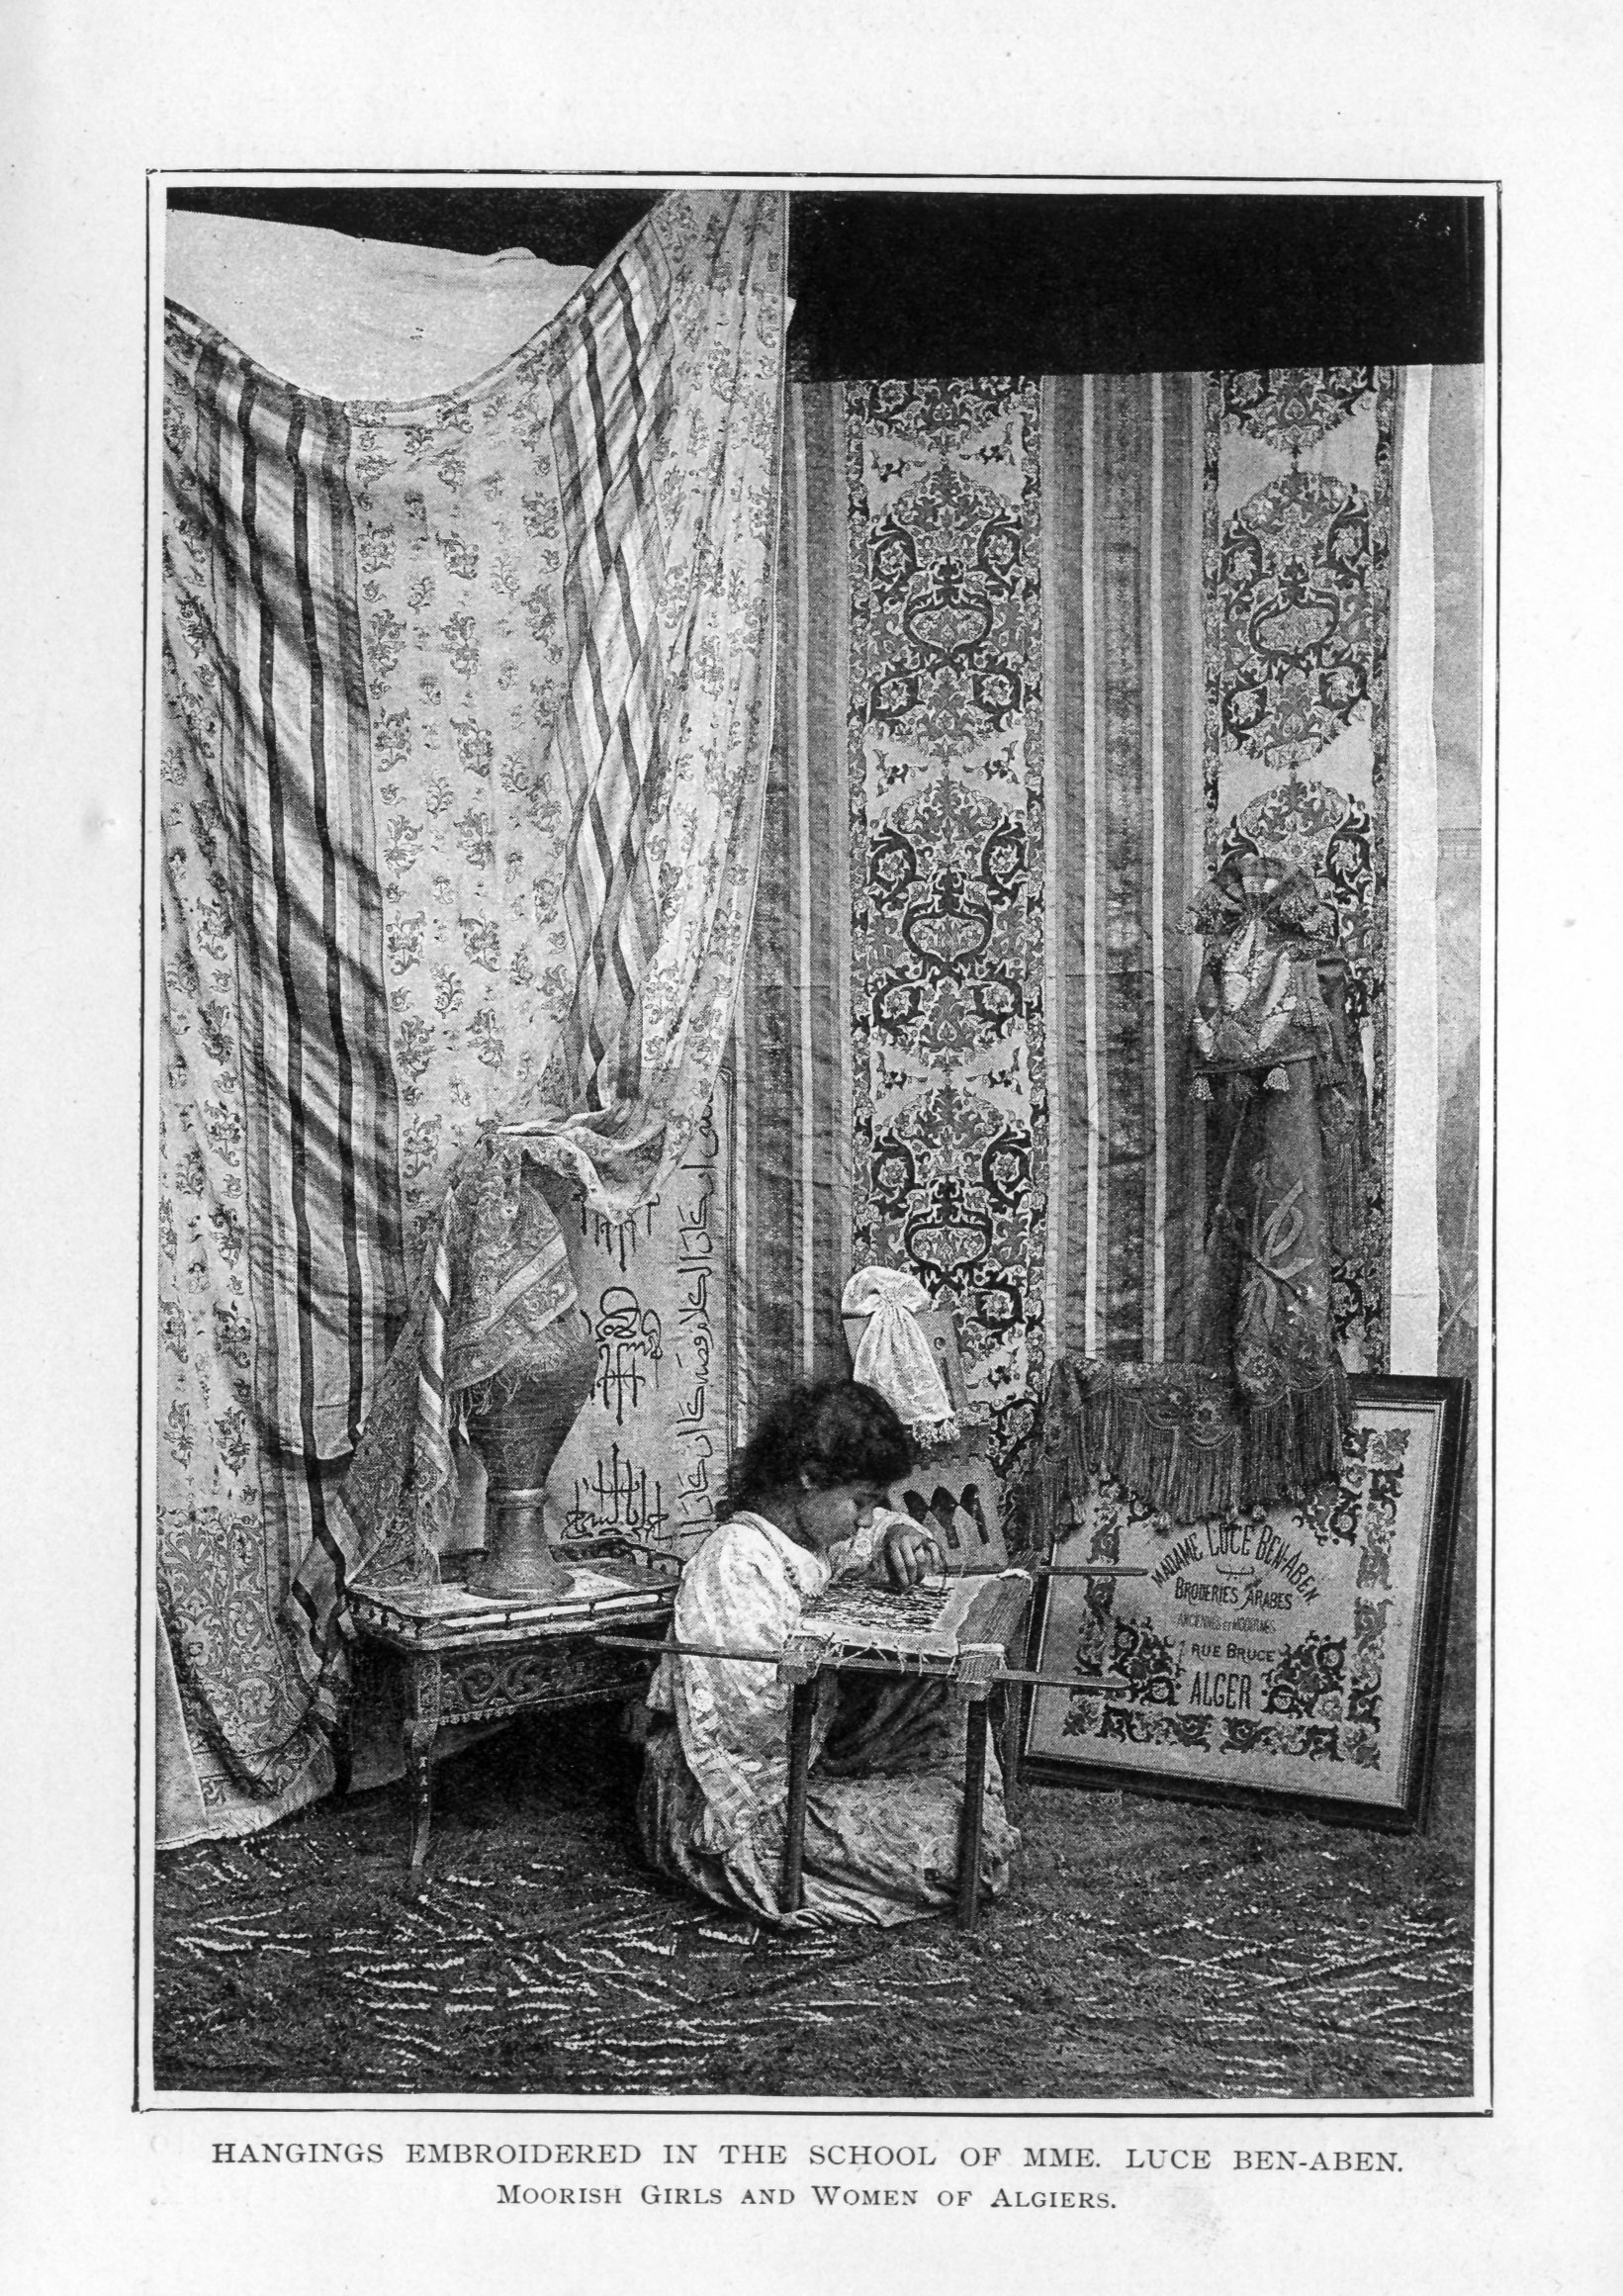 young girl embroidering in room hung with several draping embroidered panels